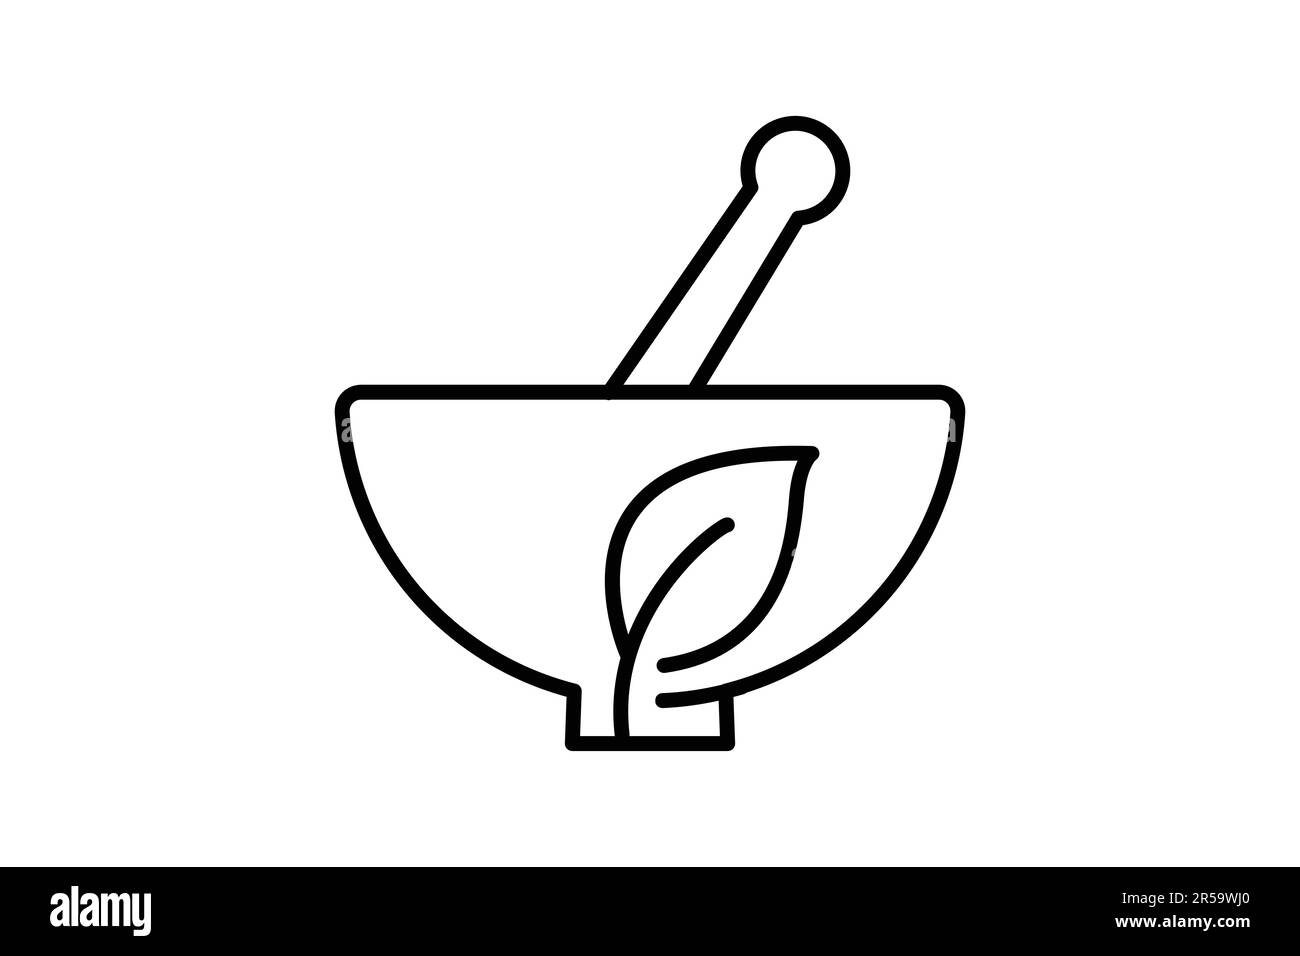 herbal medicine icon. leaves in a bowl. icon related to healthy living, wellness, traditional medicine. Line icon style design. Simple vector design e Stock Vector